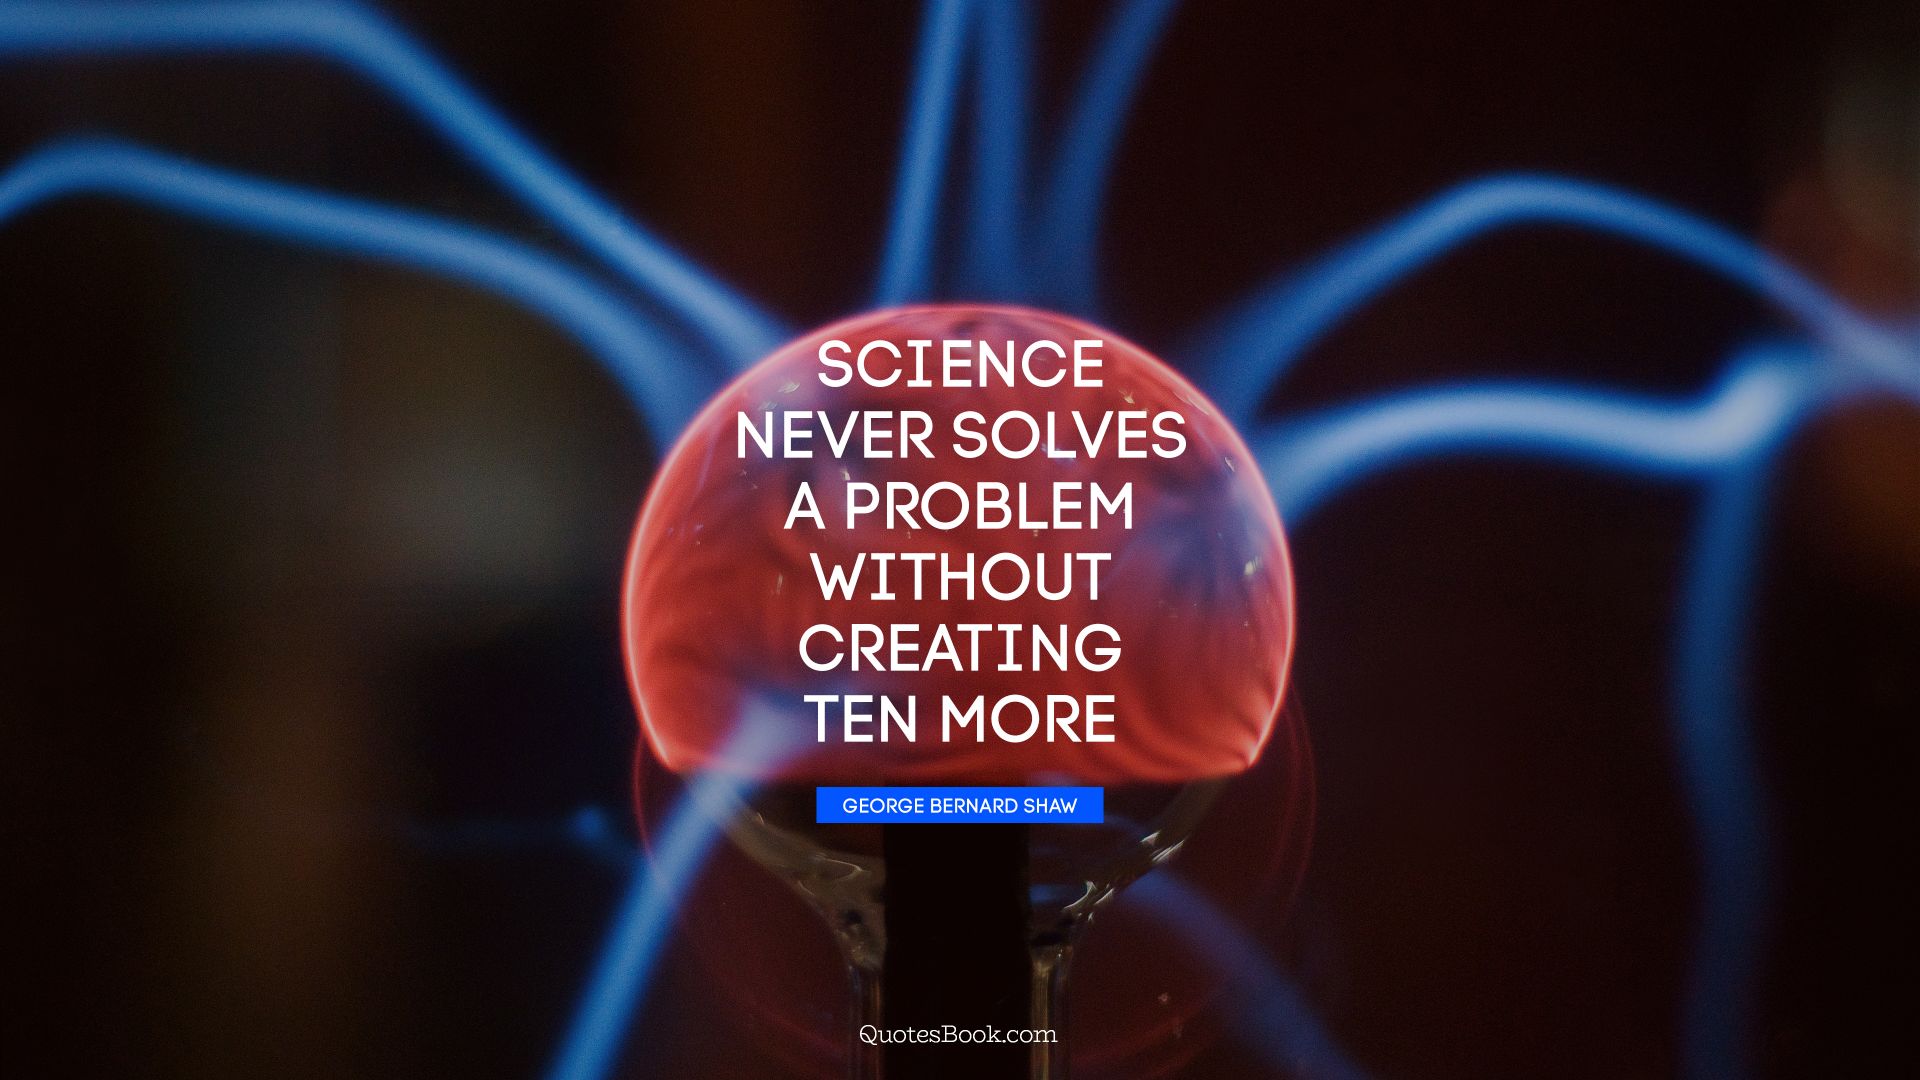 Science never solves a problem without creating ten more. - Quote by George Bernard Shaw